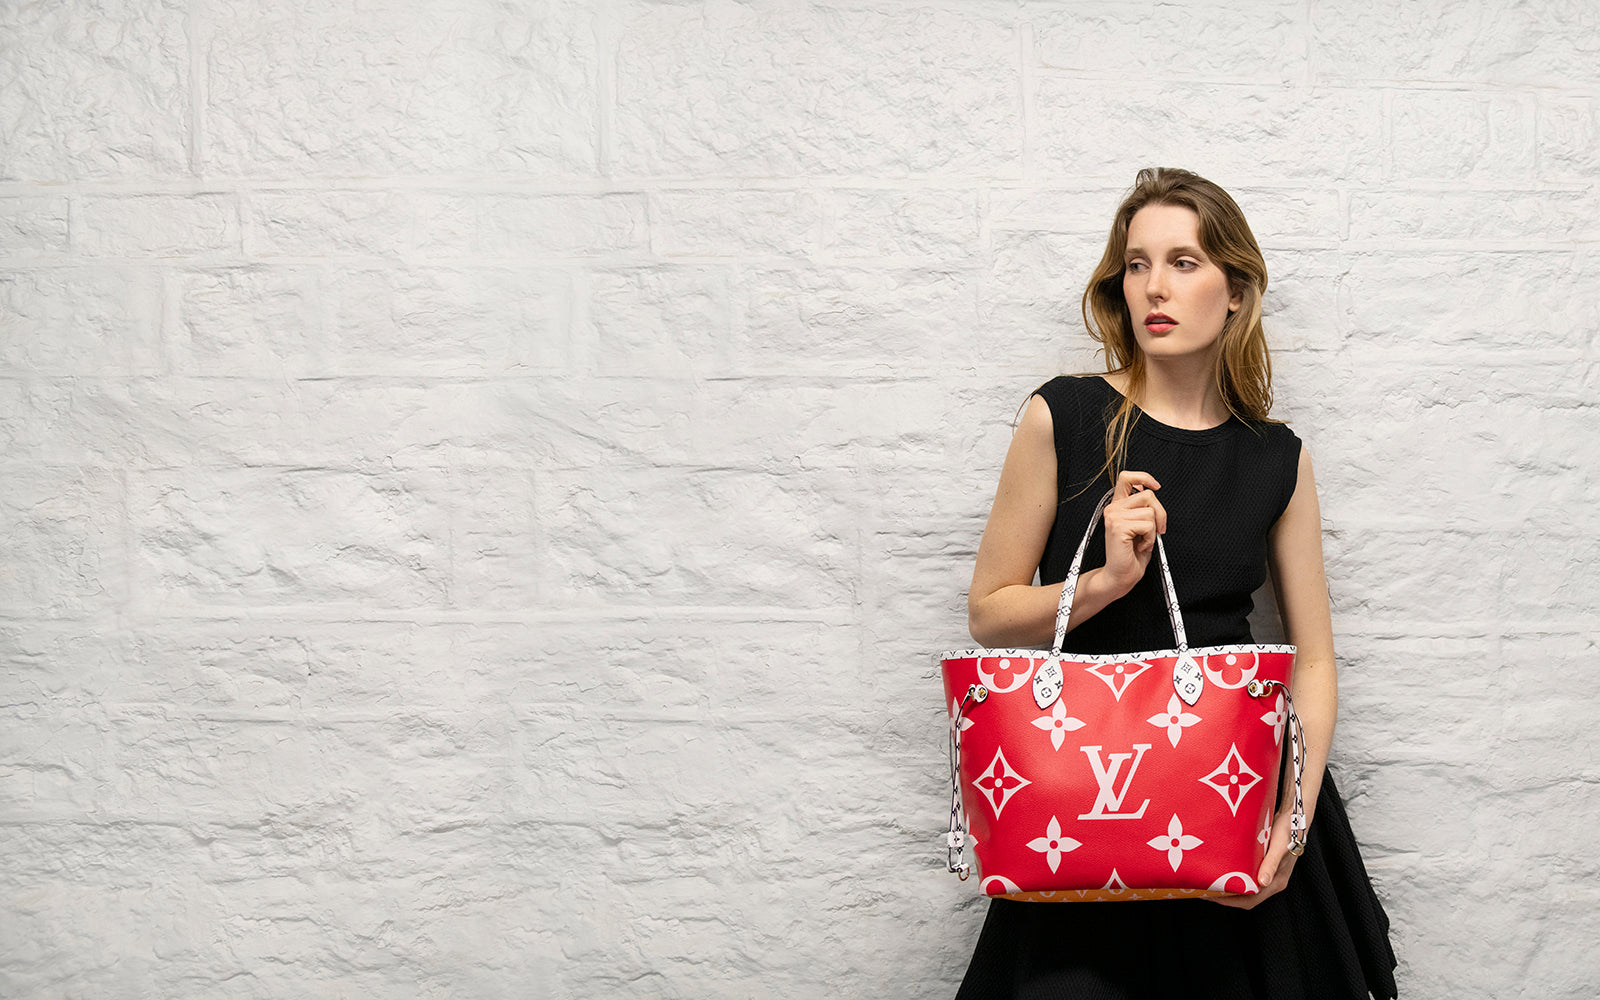 Discover authentic pre-loved Louis Vuitton handbags and more